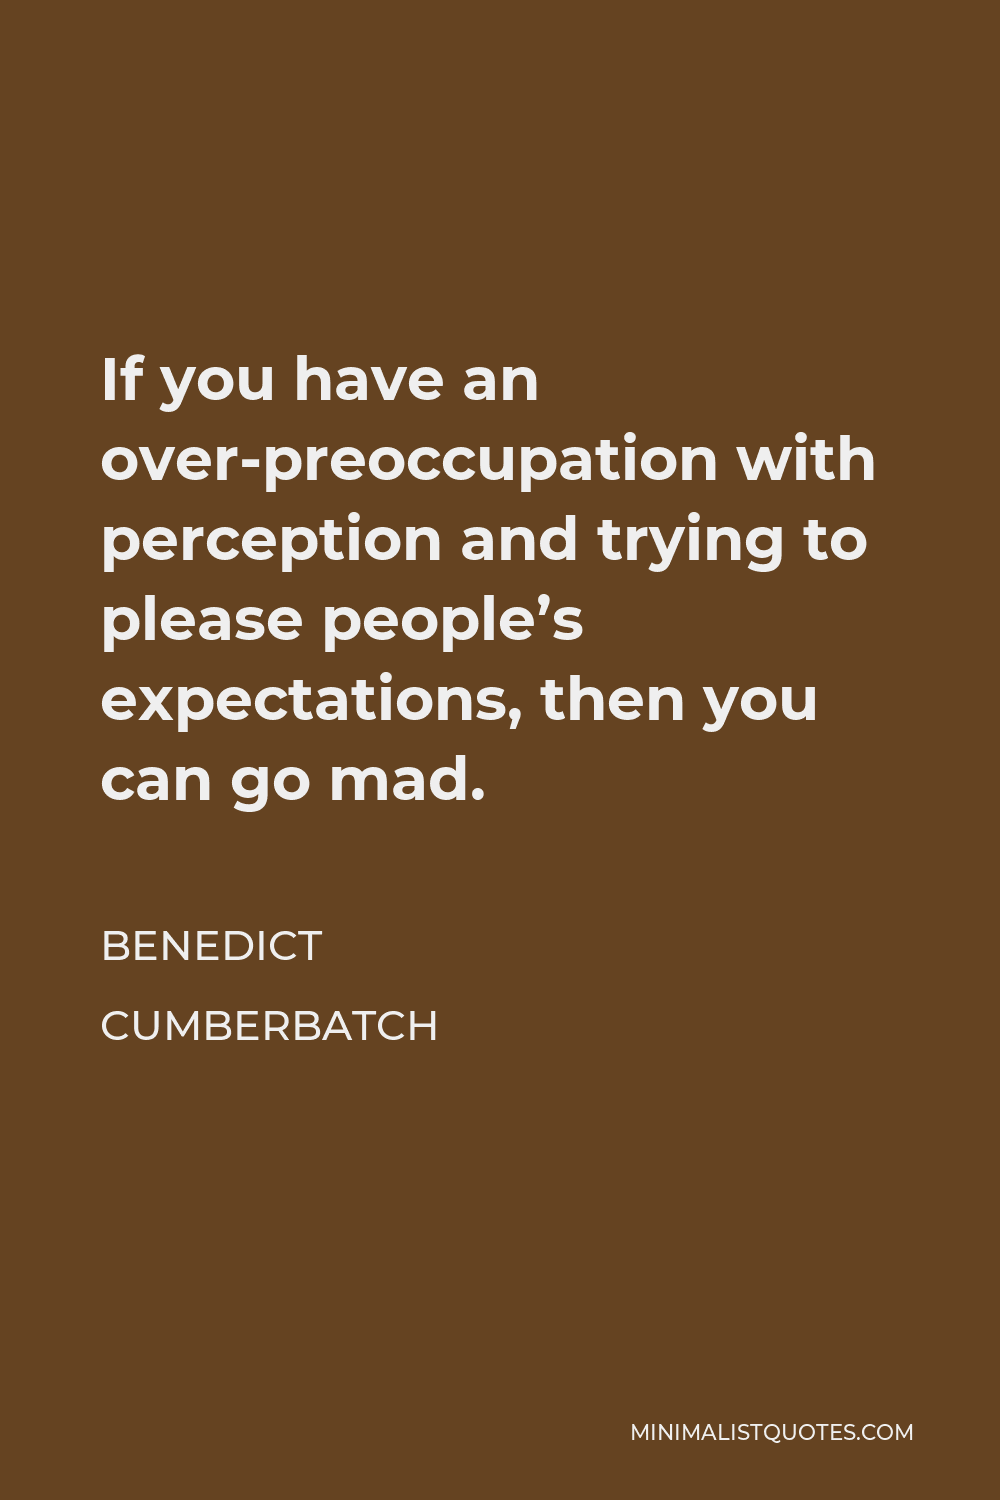 Benedict Cumberbatch Quote - If you have an over-preoccupation with perception and trying to please people’s expectations, then you can go mad.